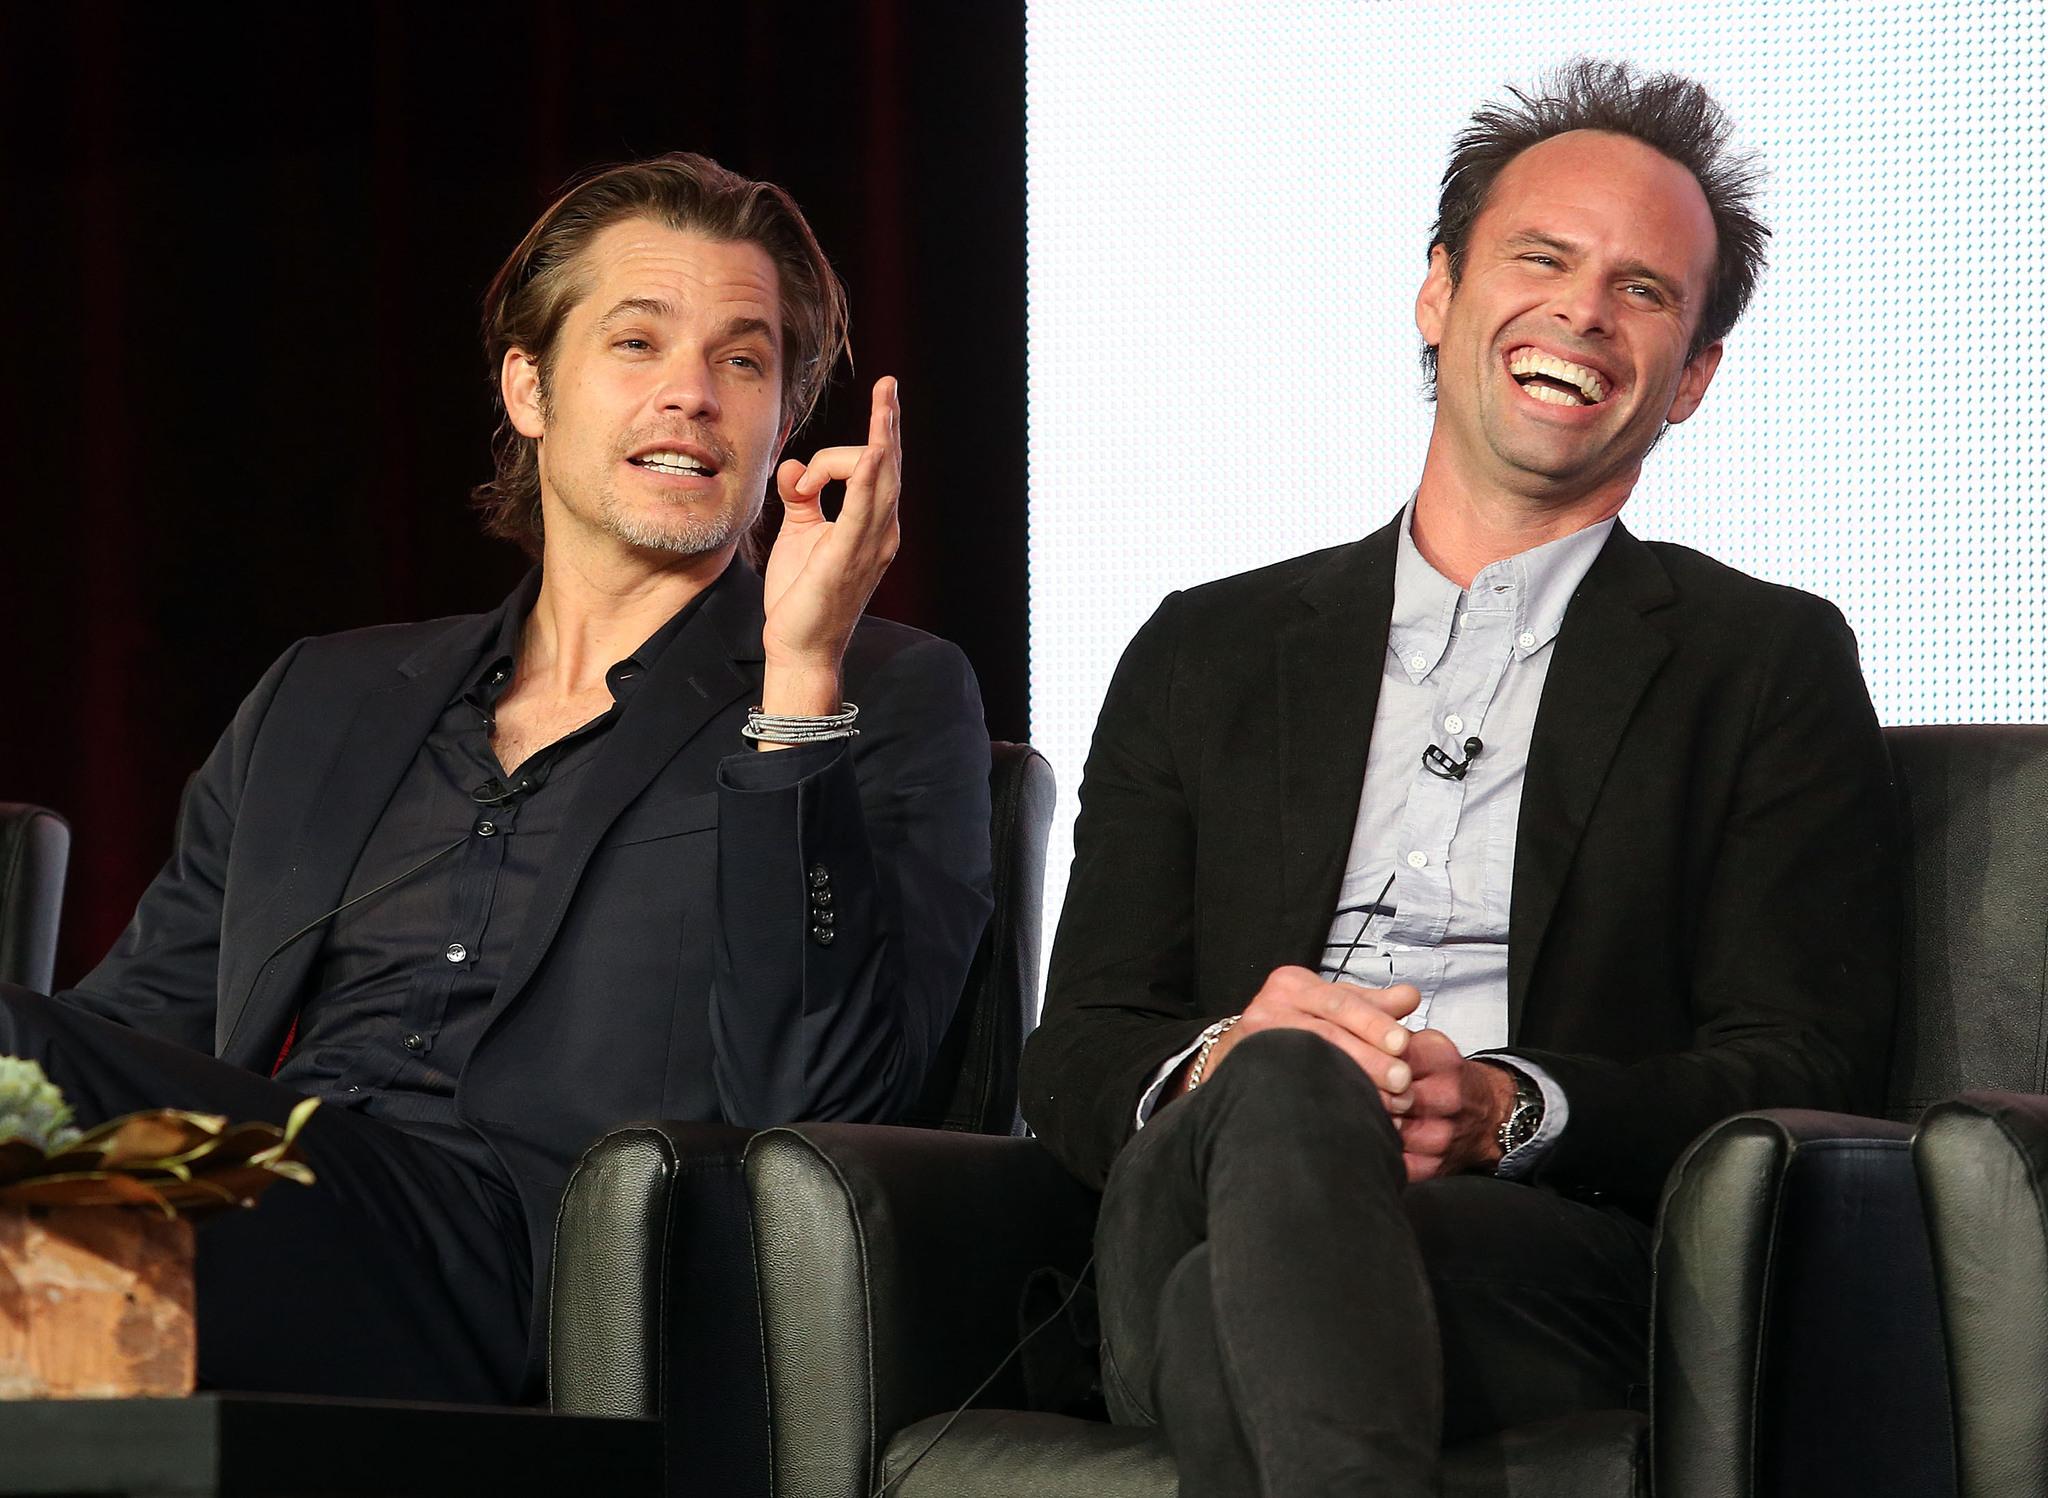 Walton Goggins and Timothy Olyphant at event of Justified (2010)